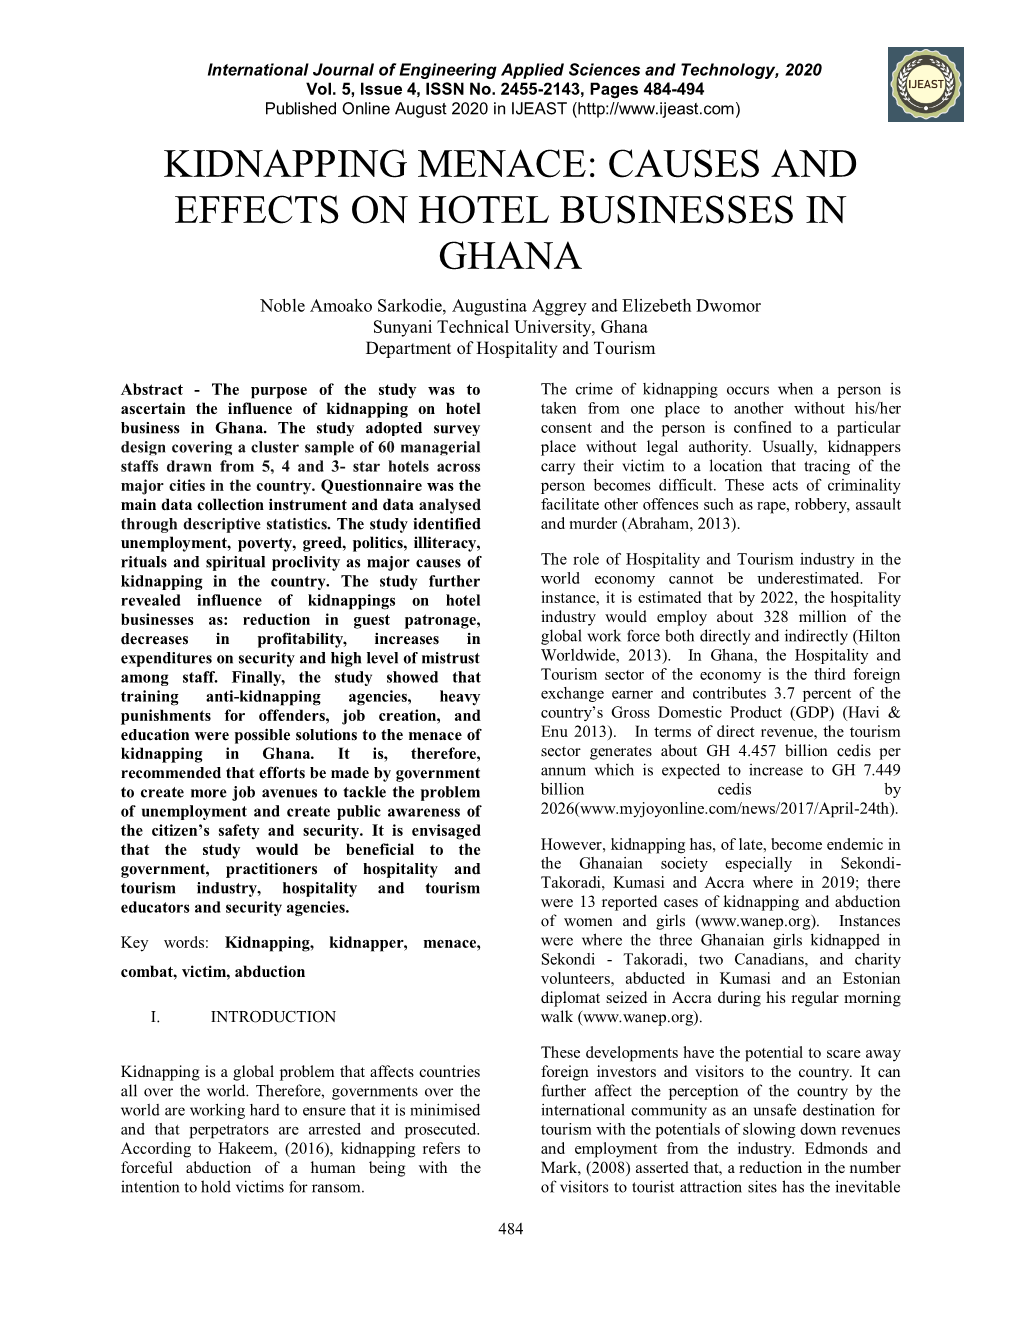 Causes and Effects on Hotel Businesses in Ghana